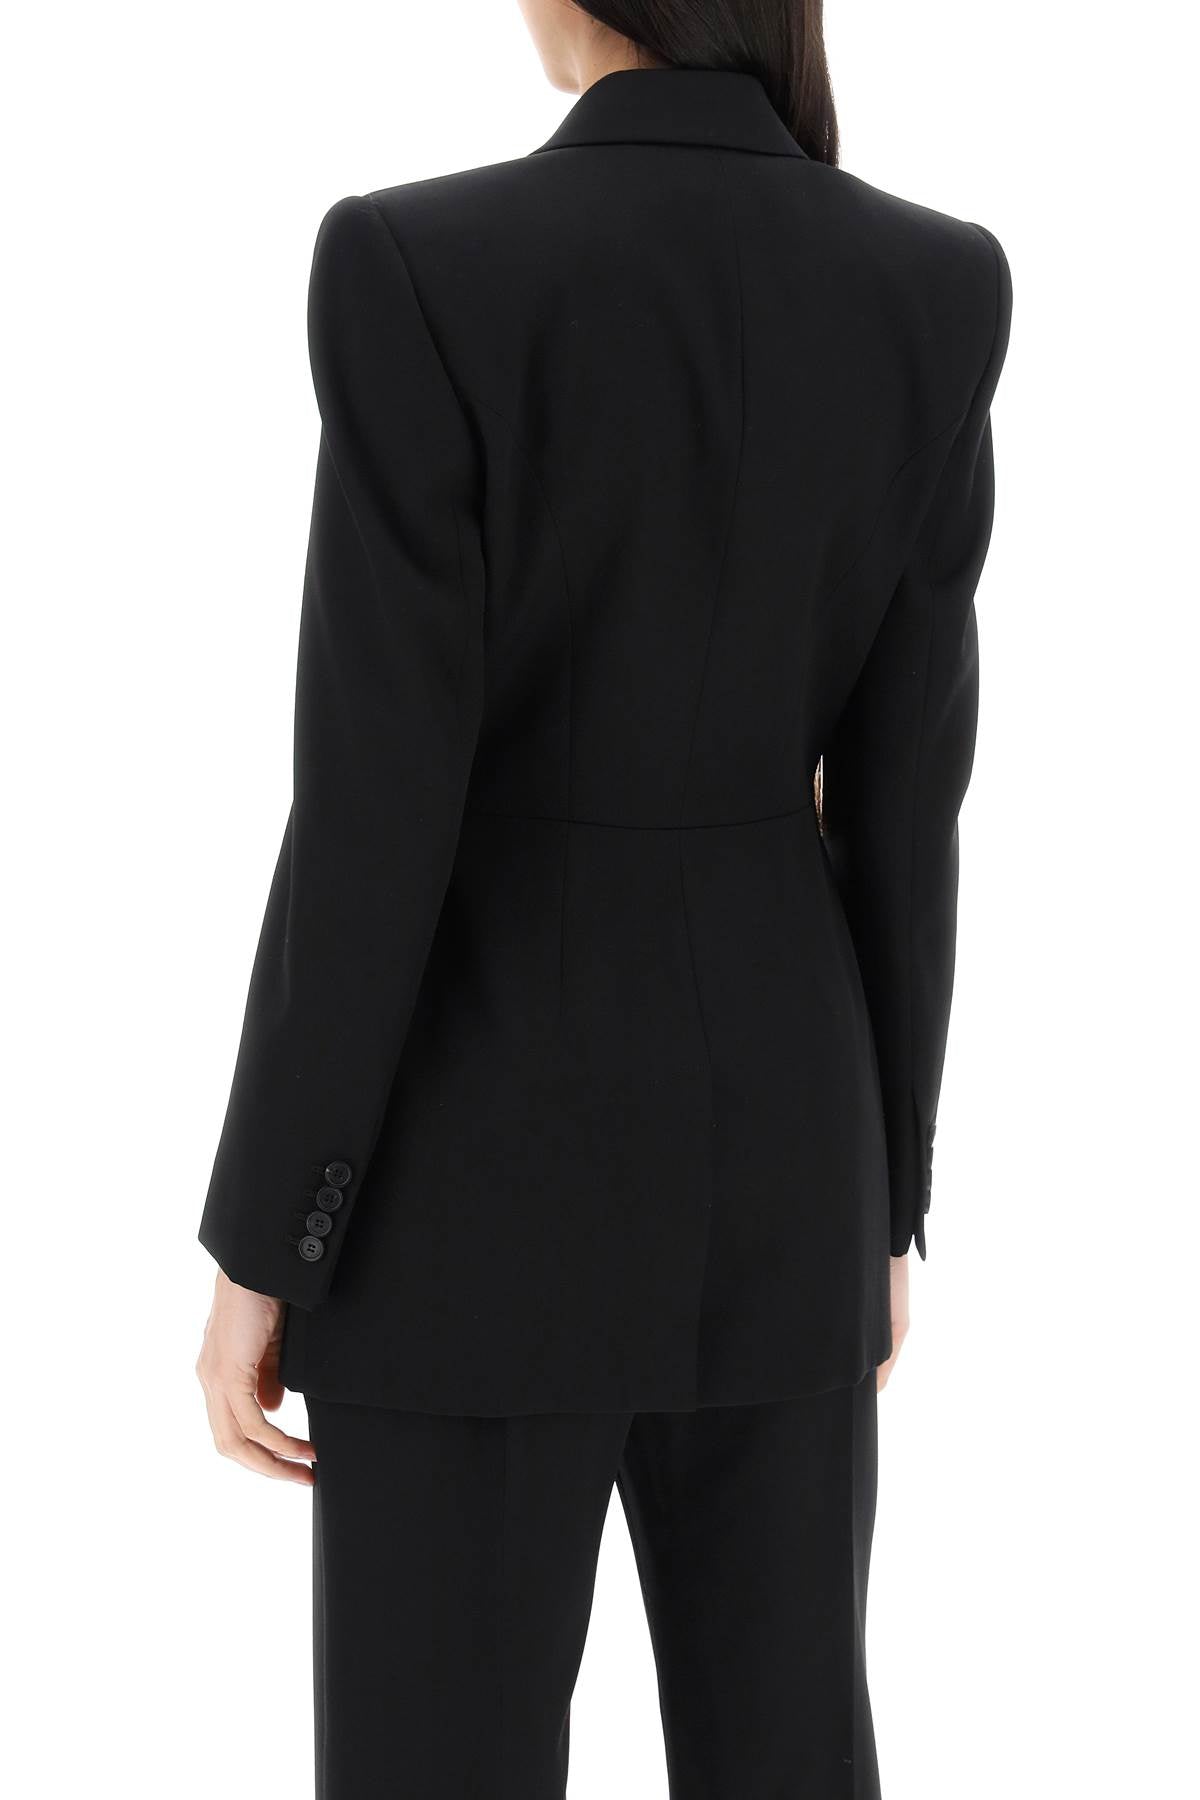 Alexander mcqueen fitted jacket with bustier details-2